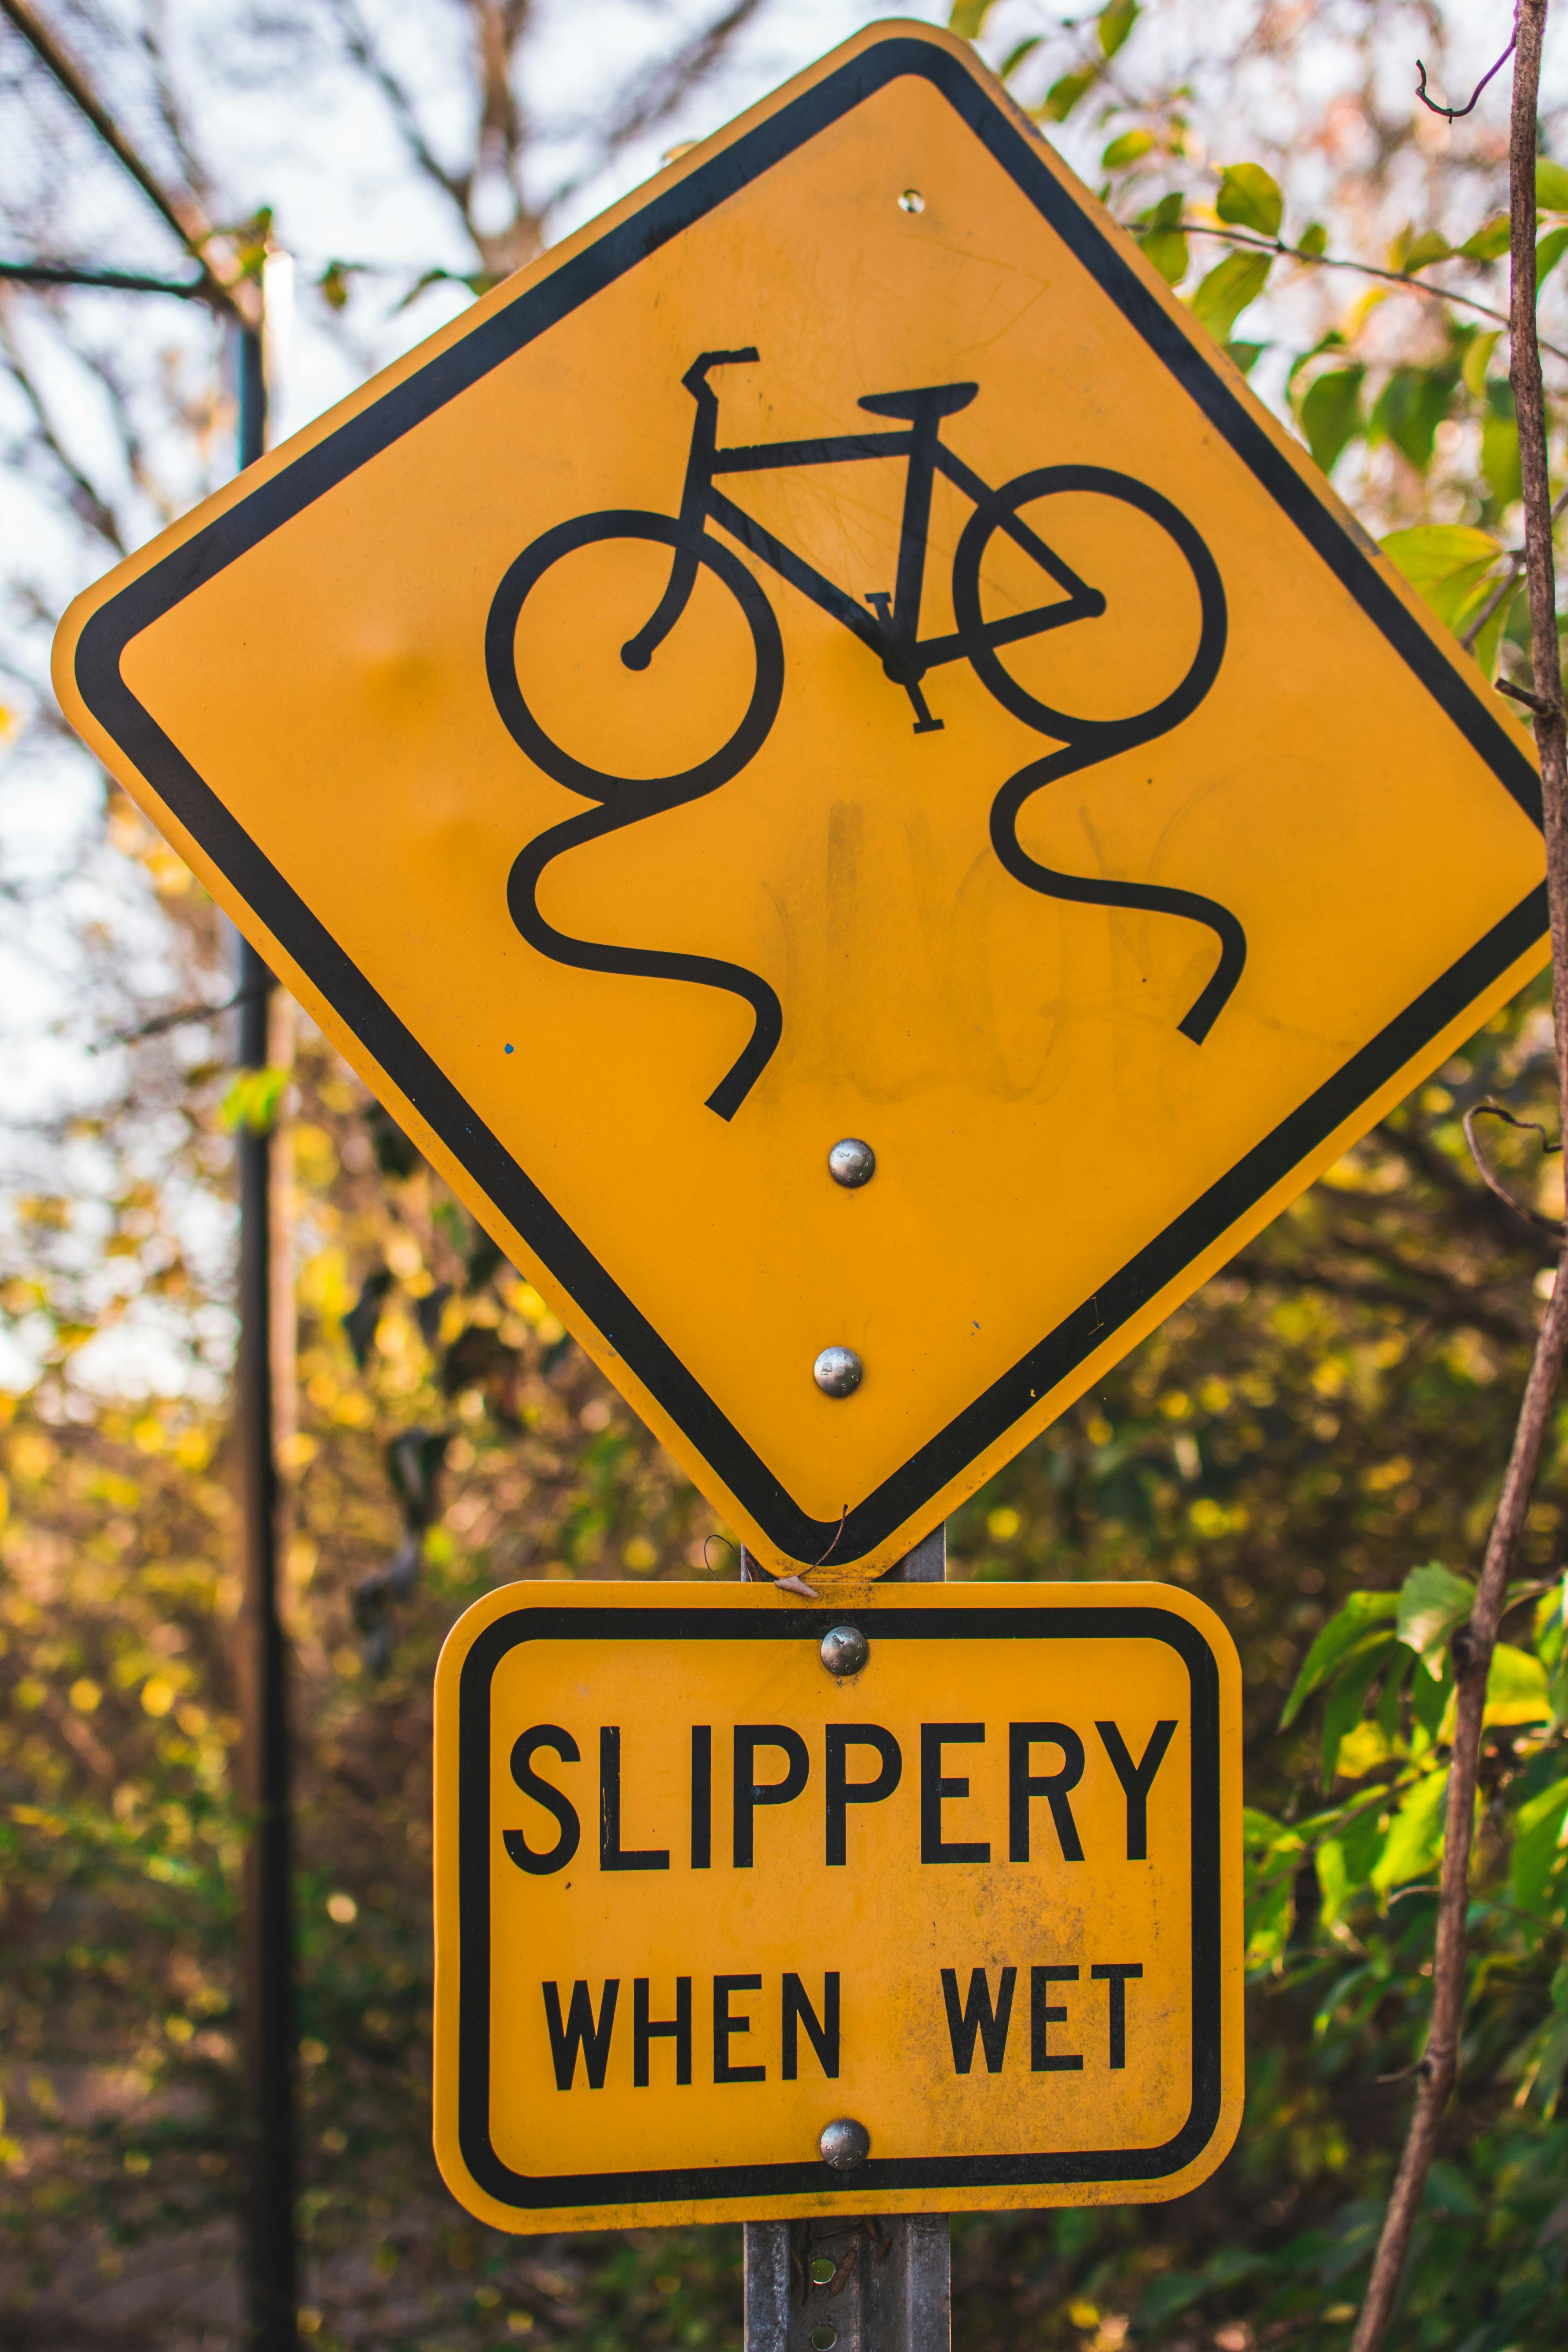 Yellow and Black Slippery When Wet Road Sign Board · Free Stock Photo